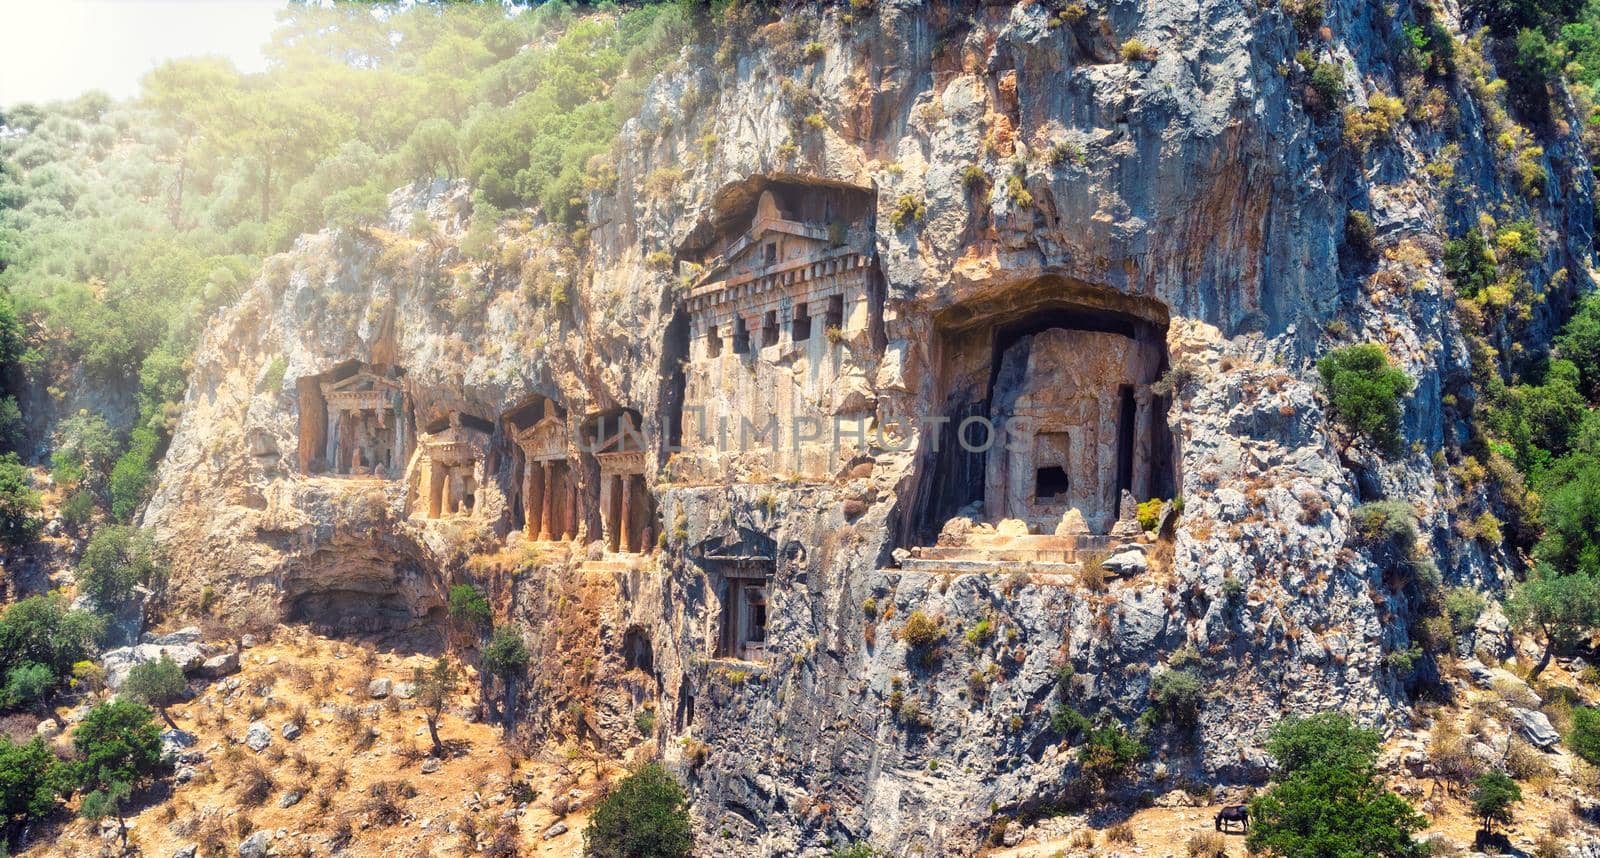 The ancient ruins of Myrna city close to Antalya Turkey, with creepy rock tombs lightened by sun going down. by igor010